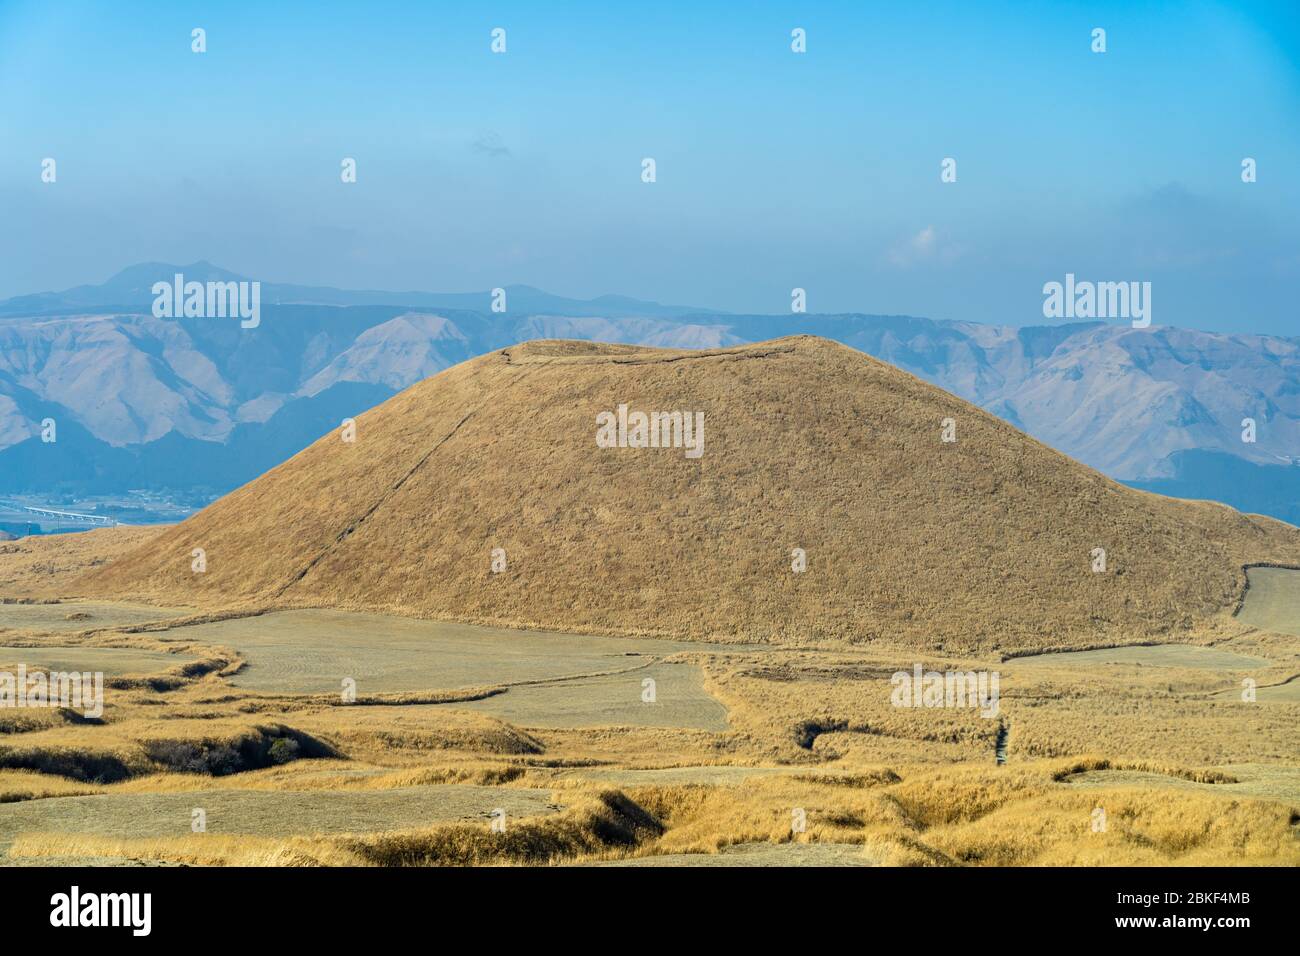 Komezuka In January A Volcanic Cone In Aso Kuju National Park A Grass Field Covers The Surrounding Area And The Surface Of It Kumamoto Prefecture Stock Photo Alamy